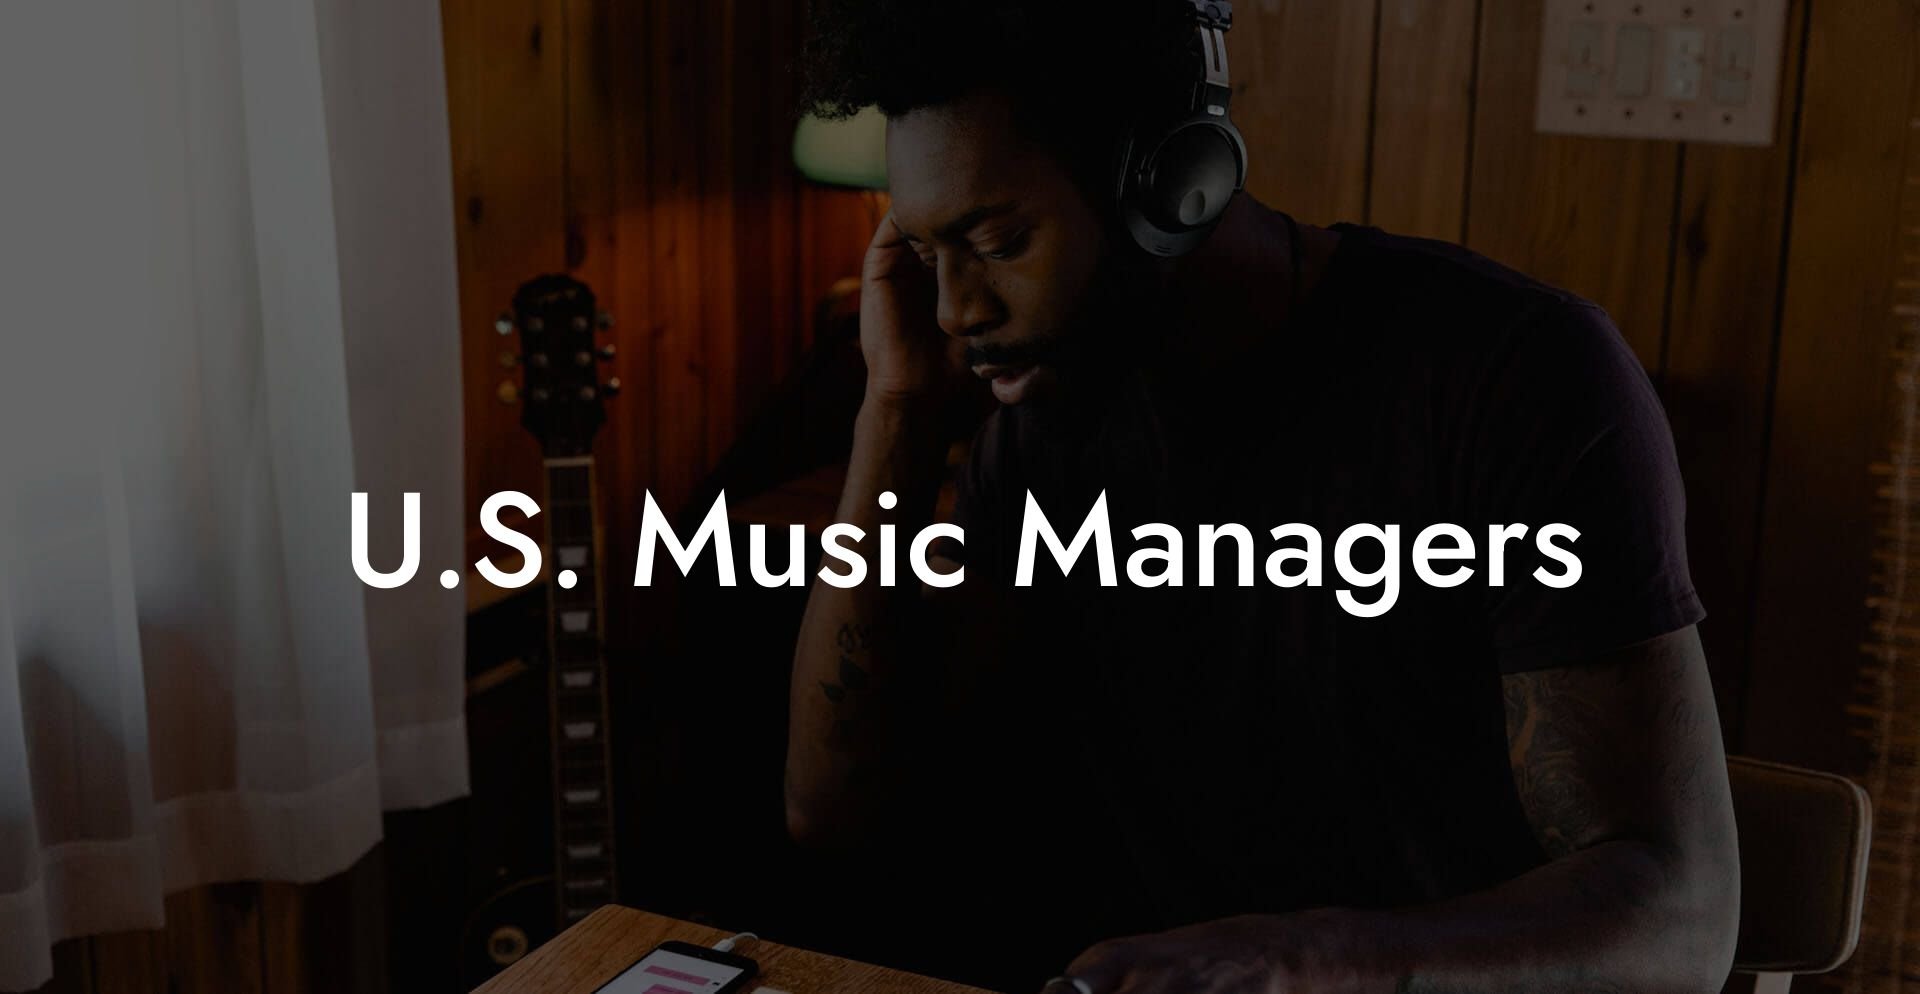 U.S. Music Managers